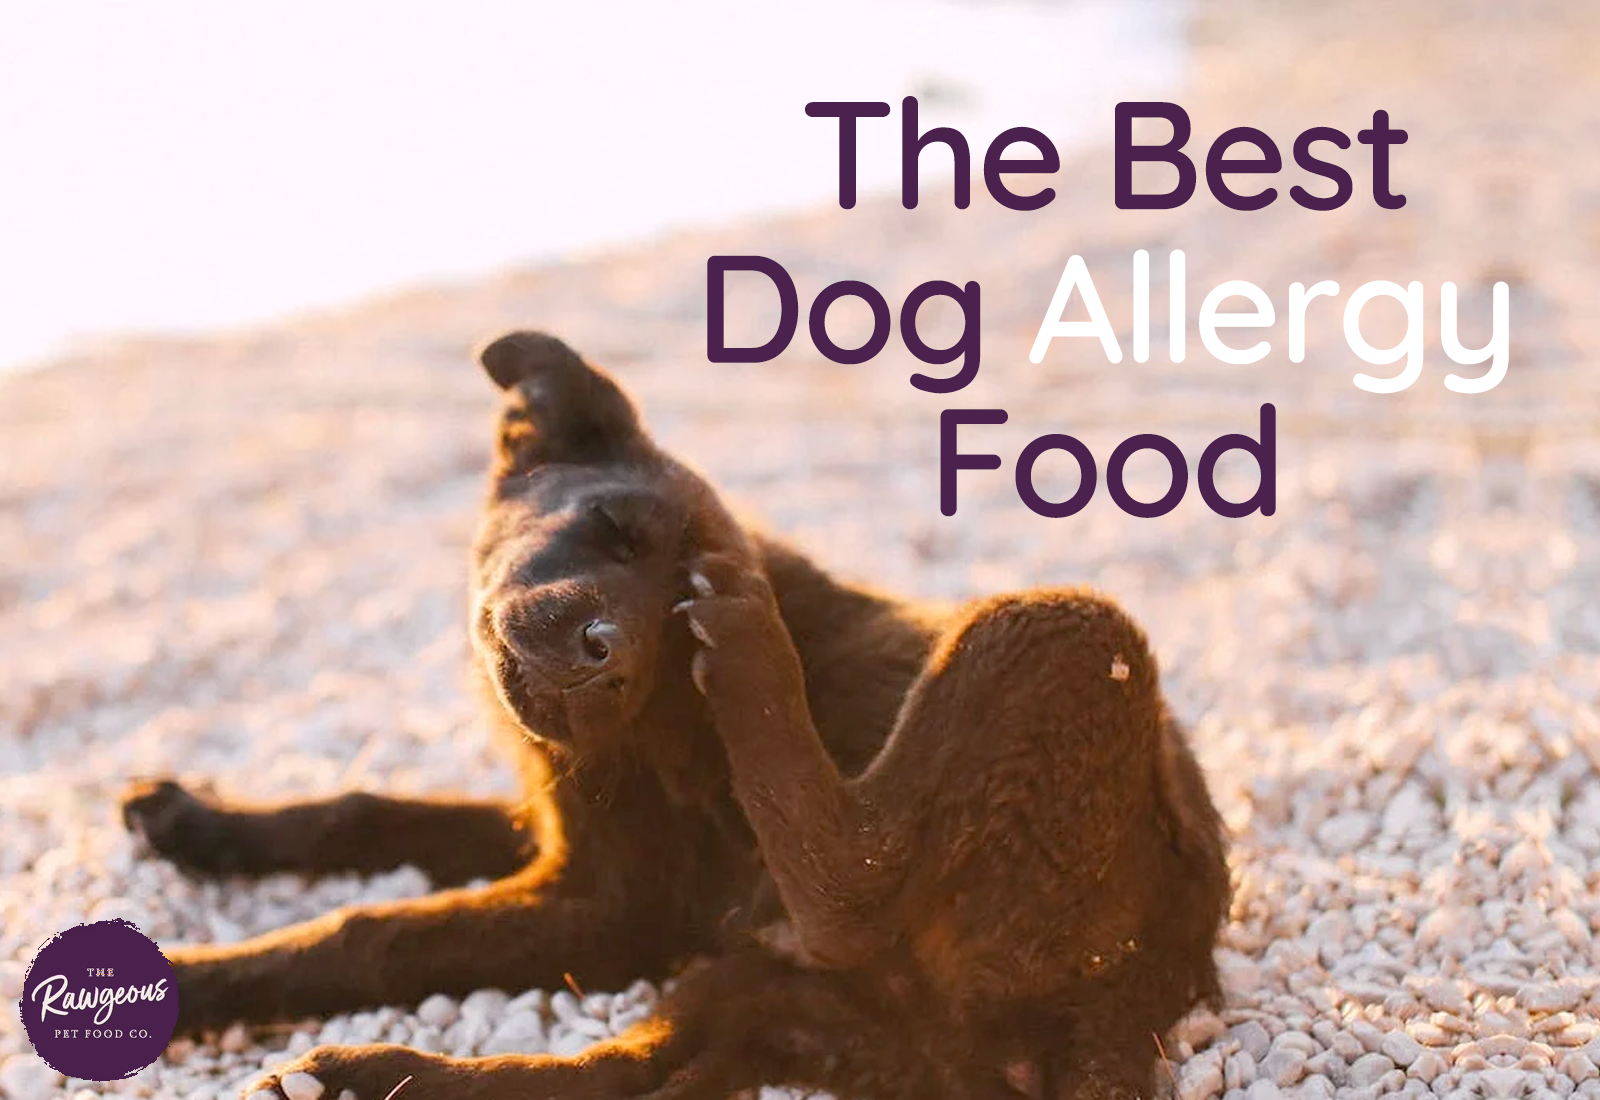 The Best Dog Allergy Food is Raw